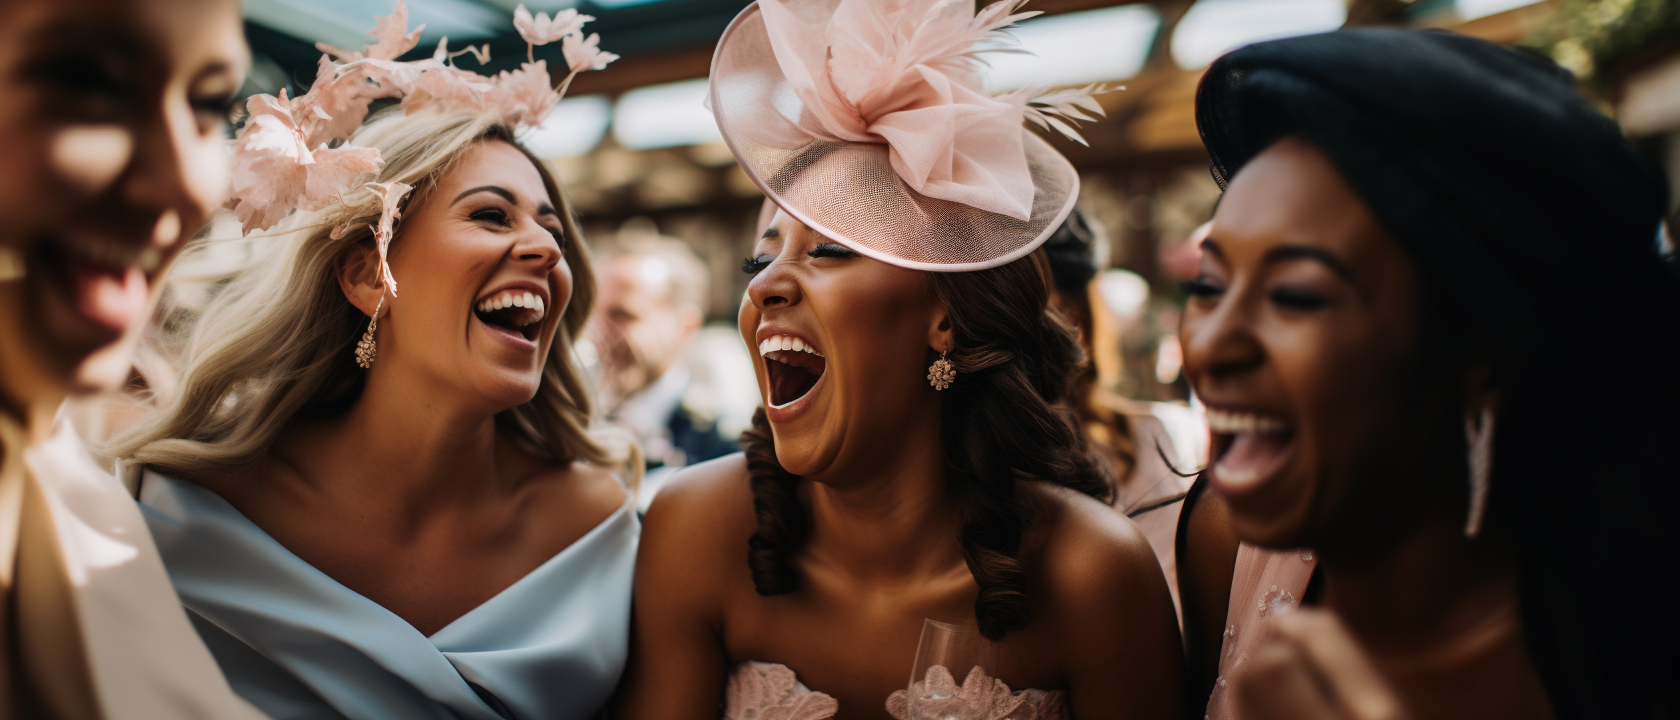 Capture all the fun of your wedding day with Shoot It Your Way